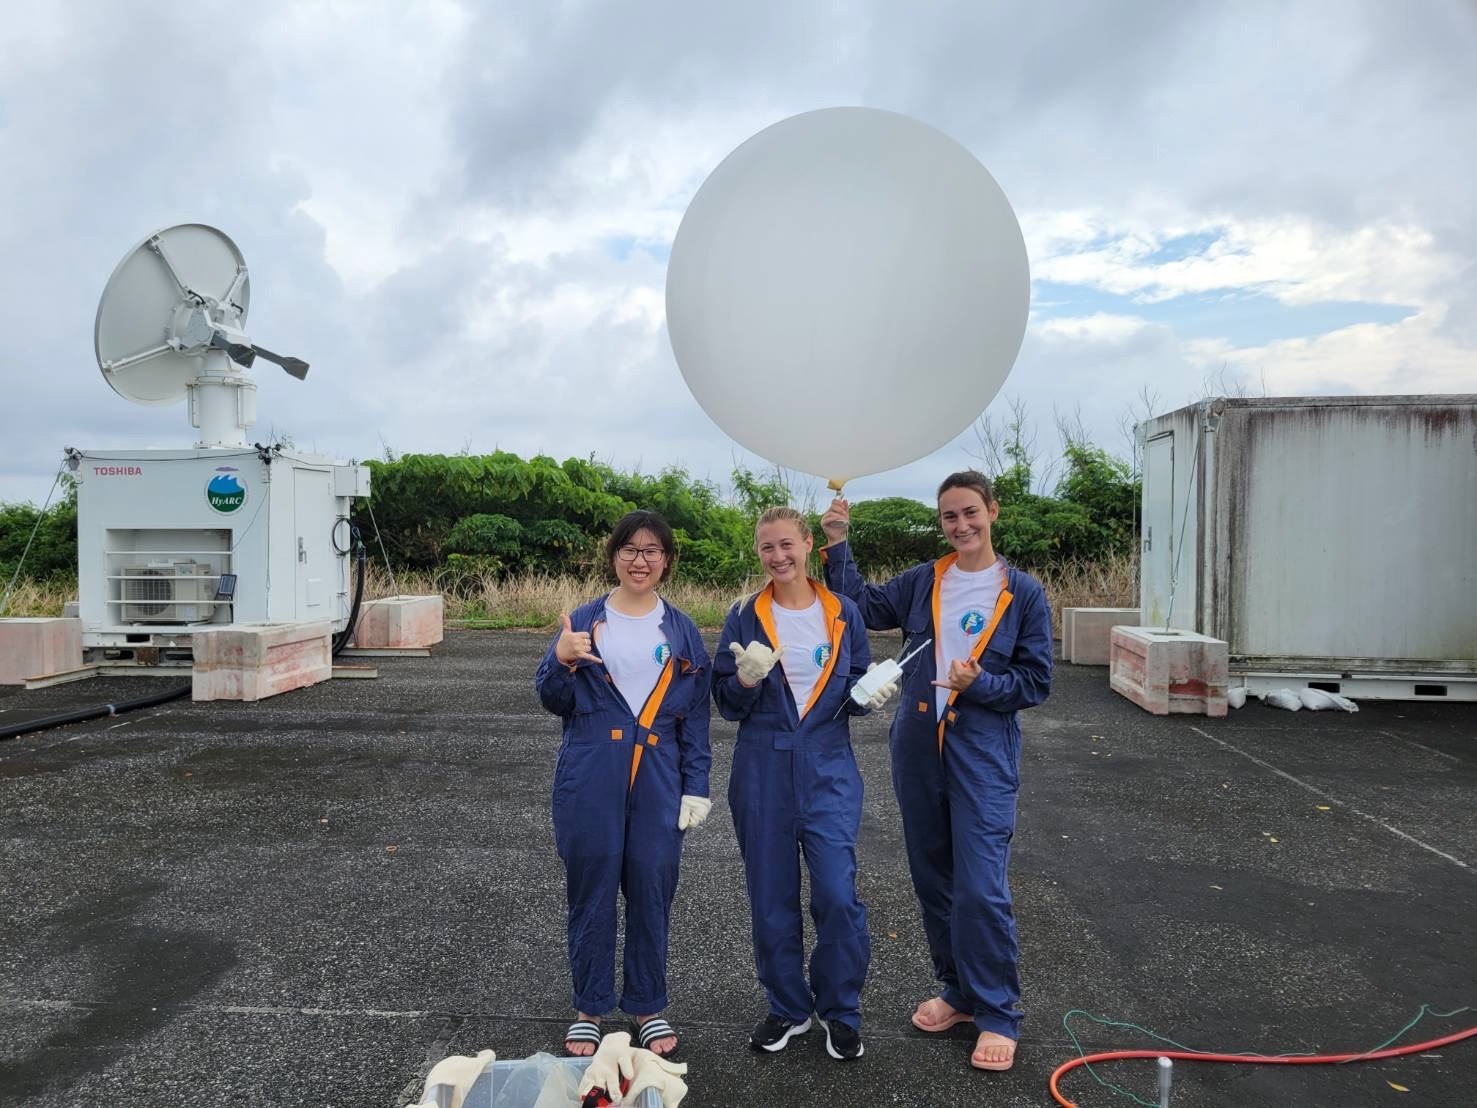 Researchers prepare to launch a weather balloon in Japan (left to right): a graduate students from Colorado State University, SOEST graduate students Mya Sears and Katie Ackerman.